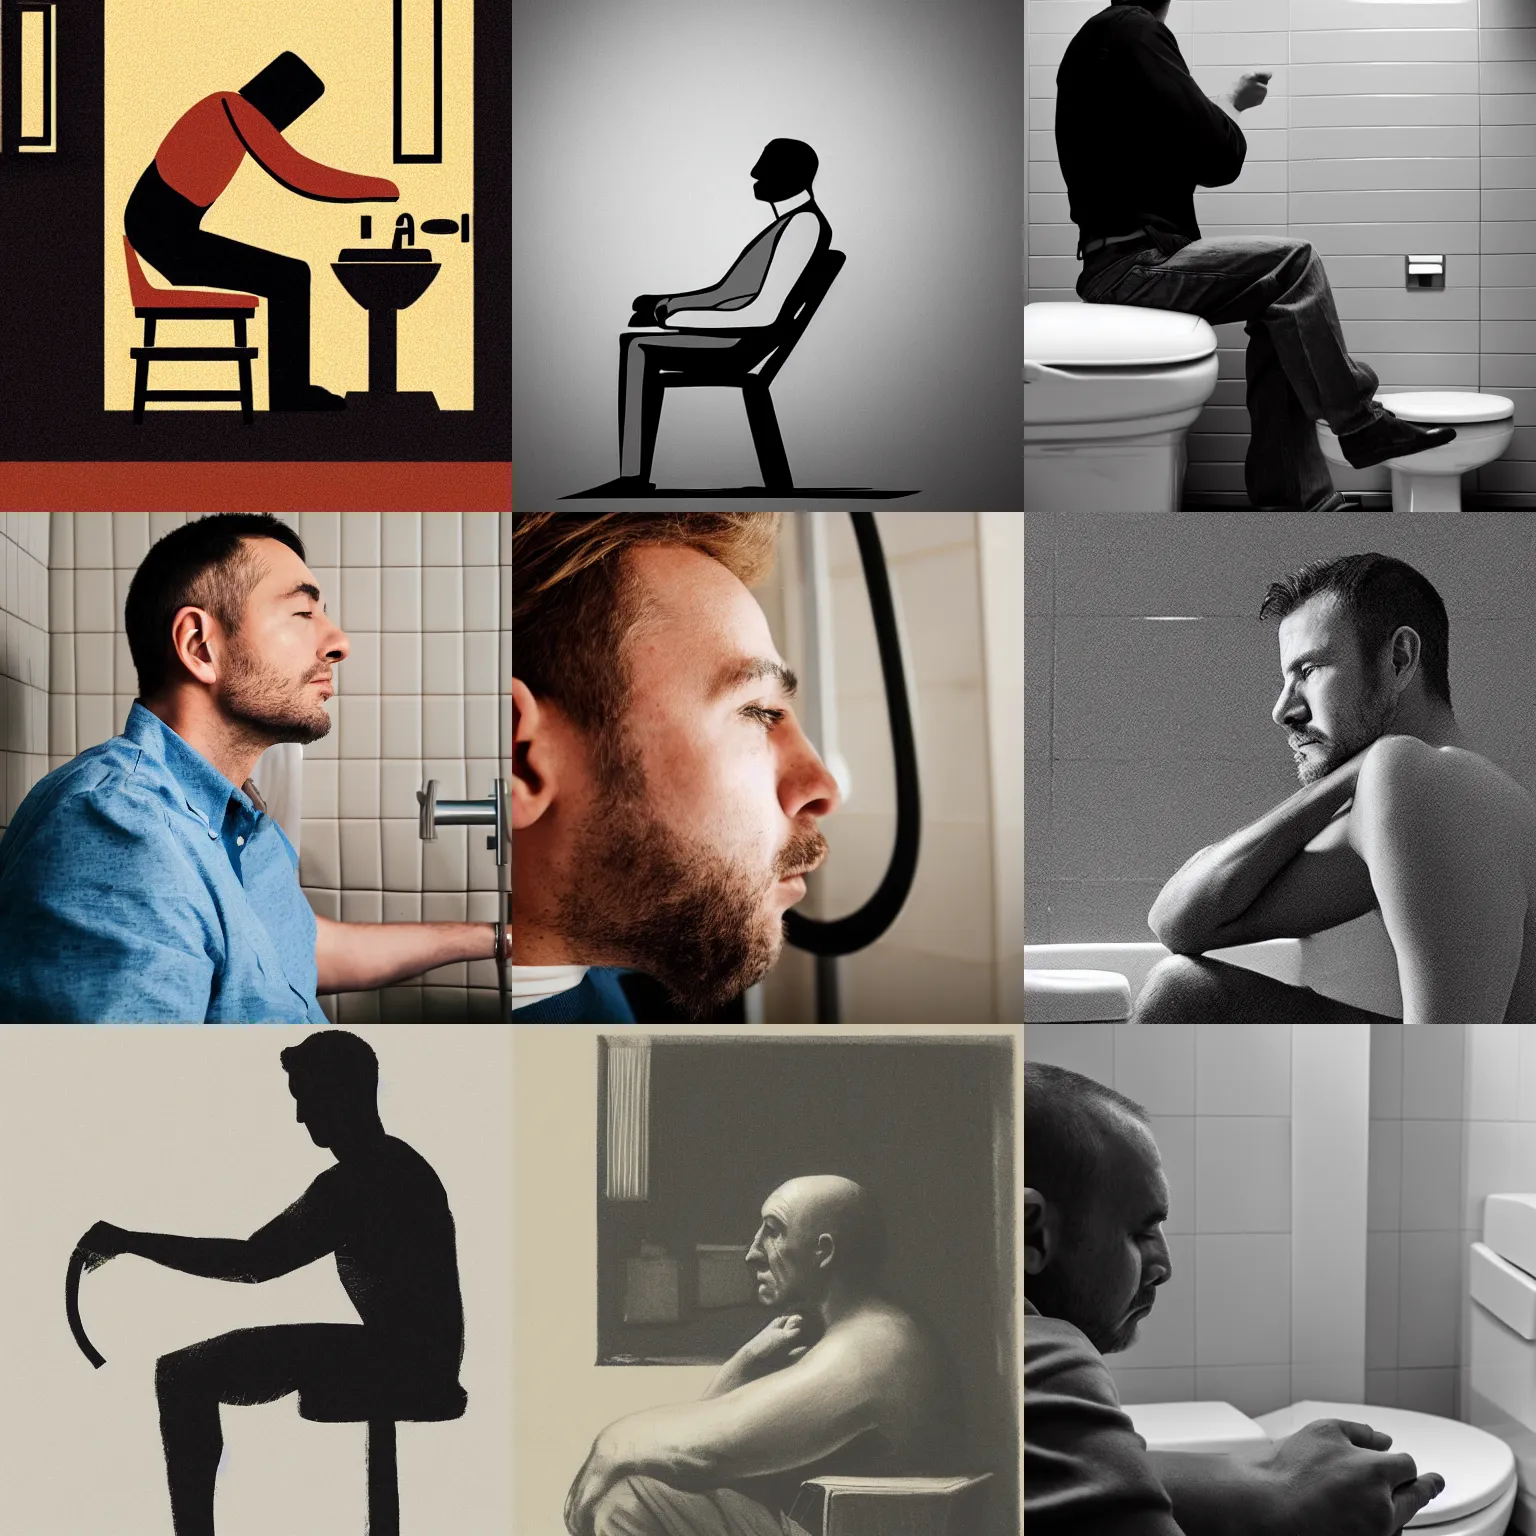 Prompt: a man is sitting on the toilet, profile